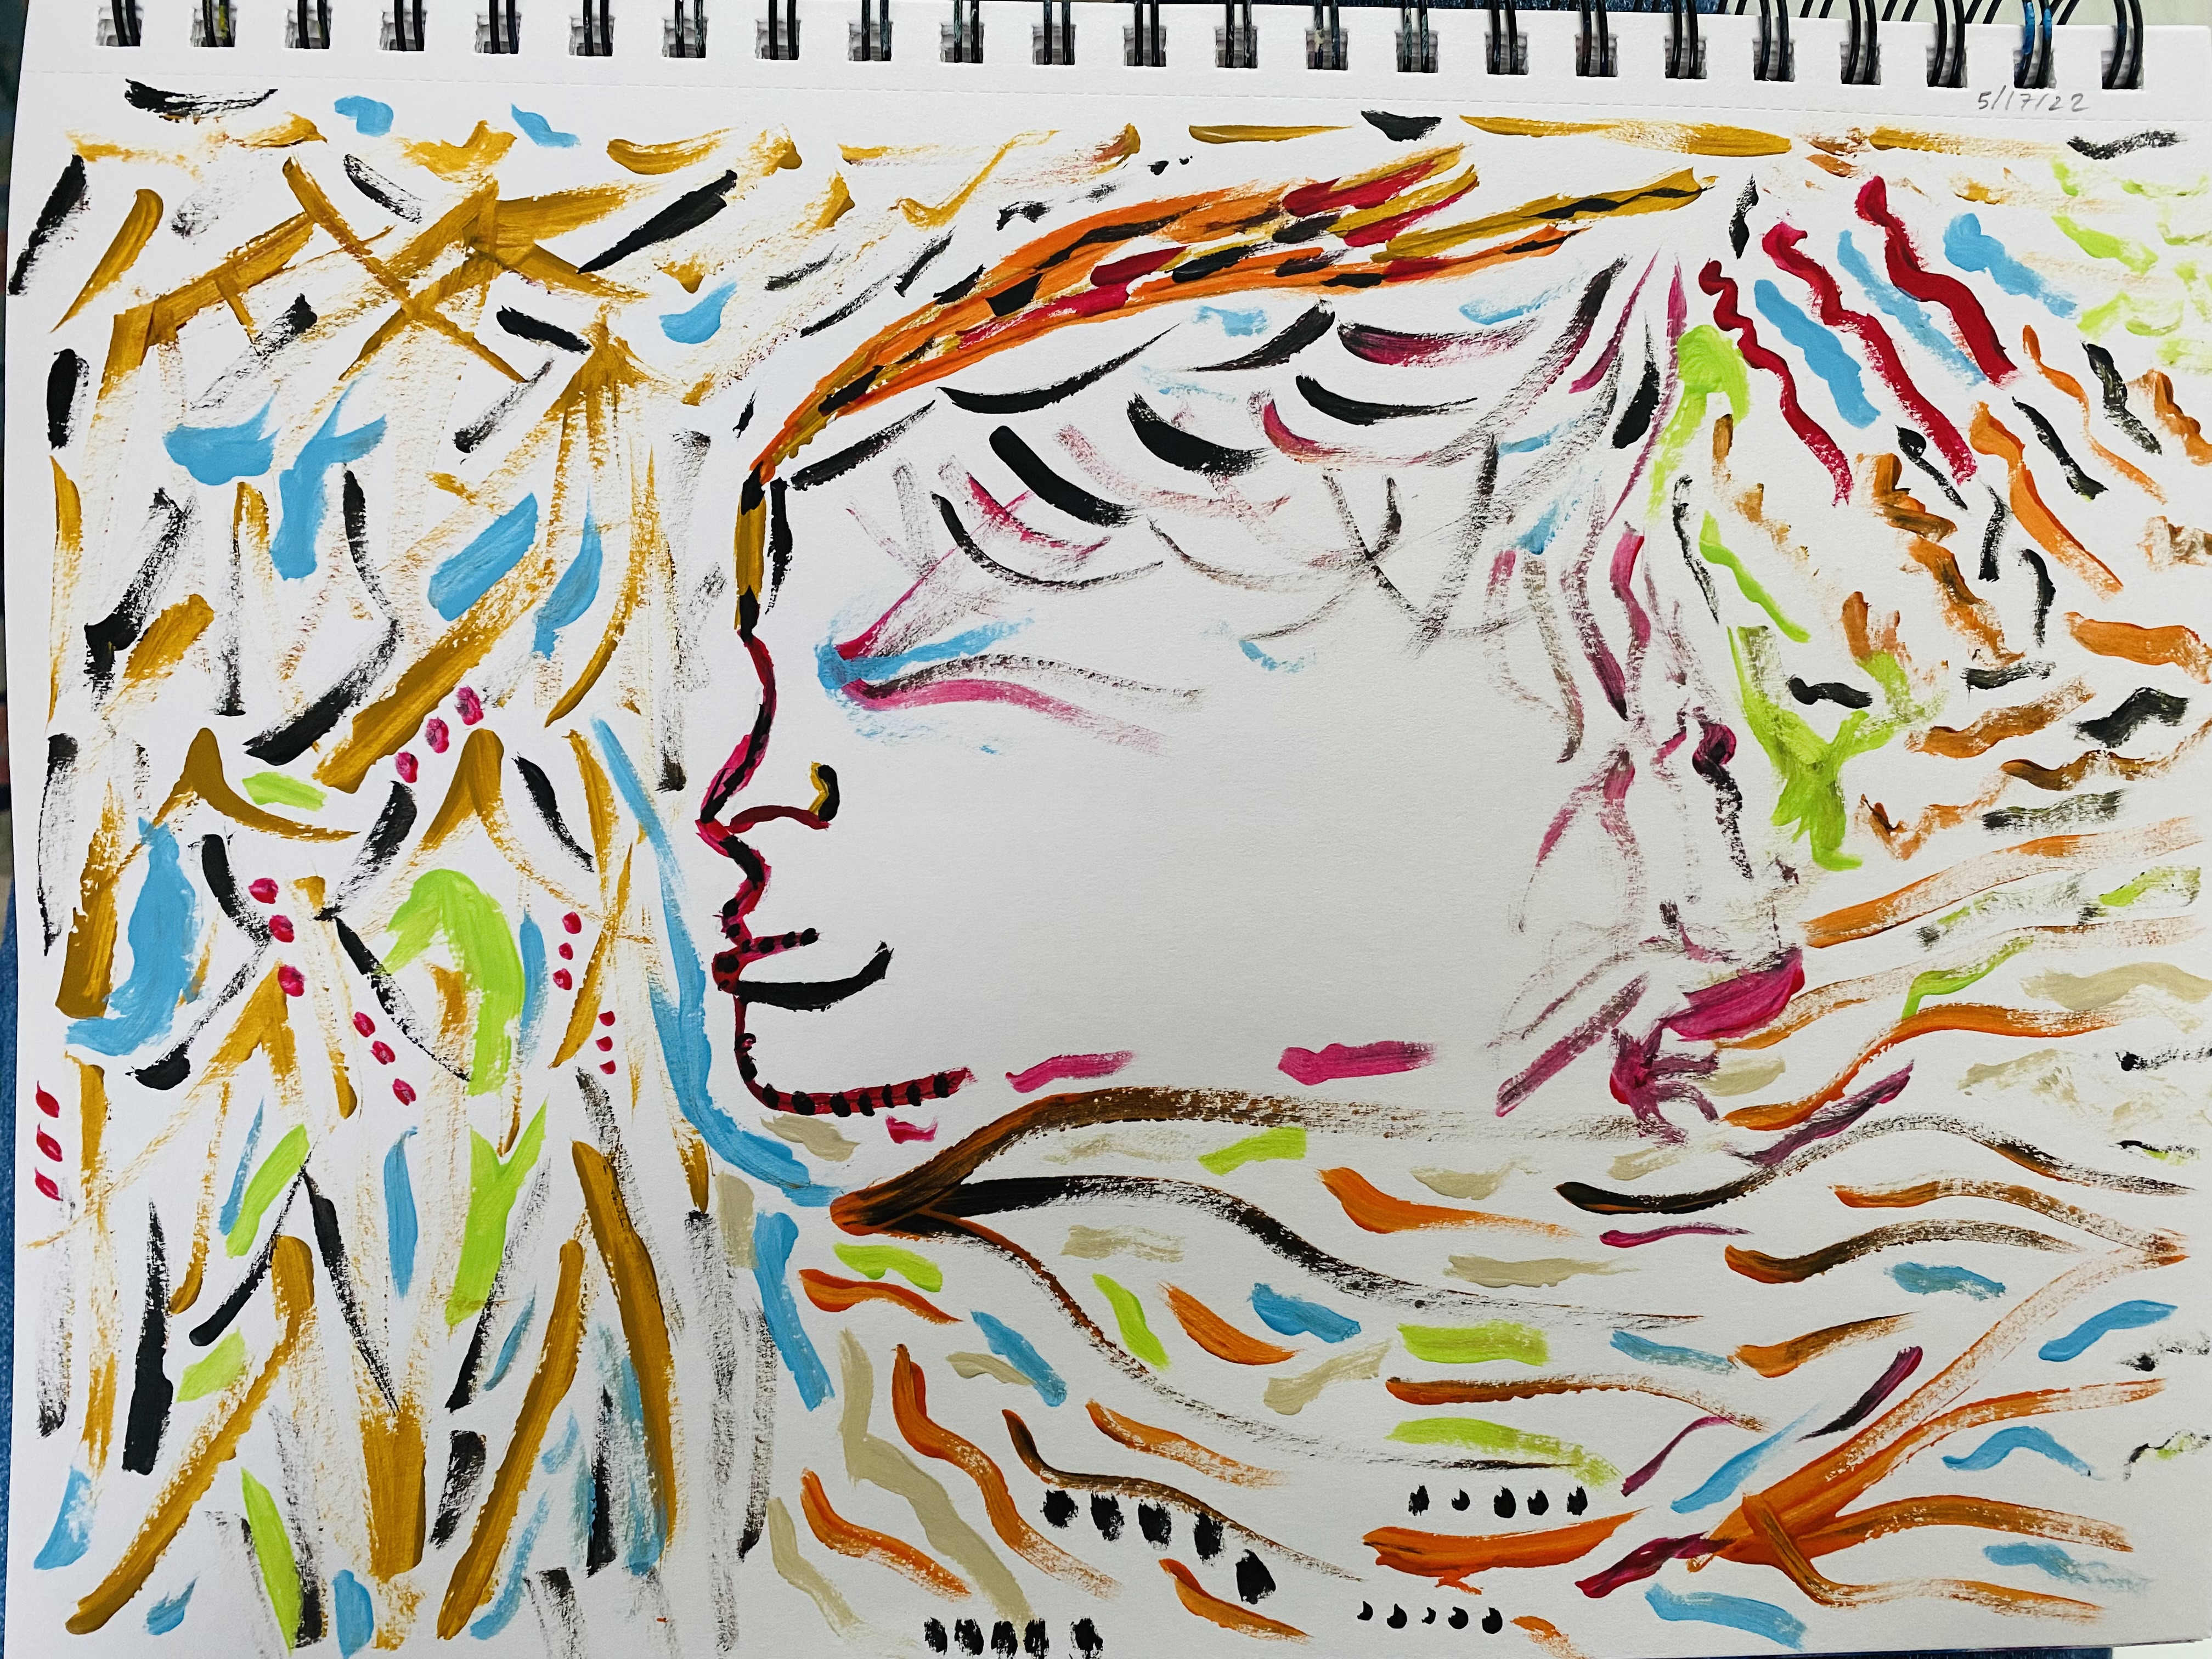 profile of a face with vibrant and trippy colors made with fast paint brush strokes. title includes pavement lyrics.